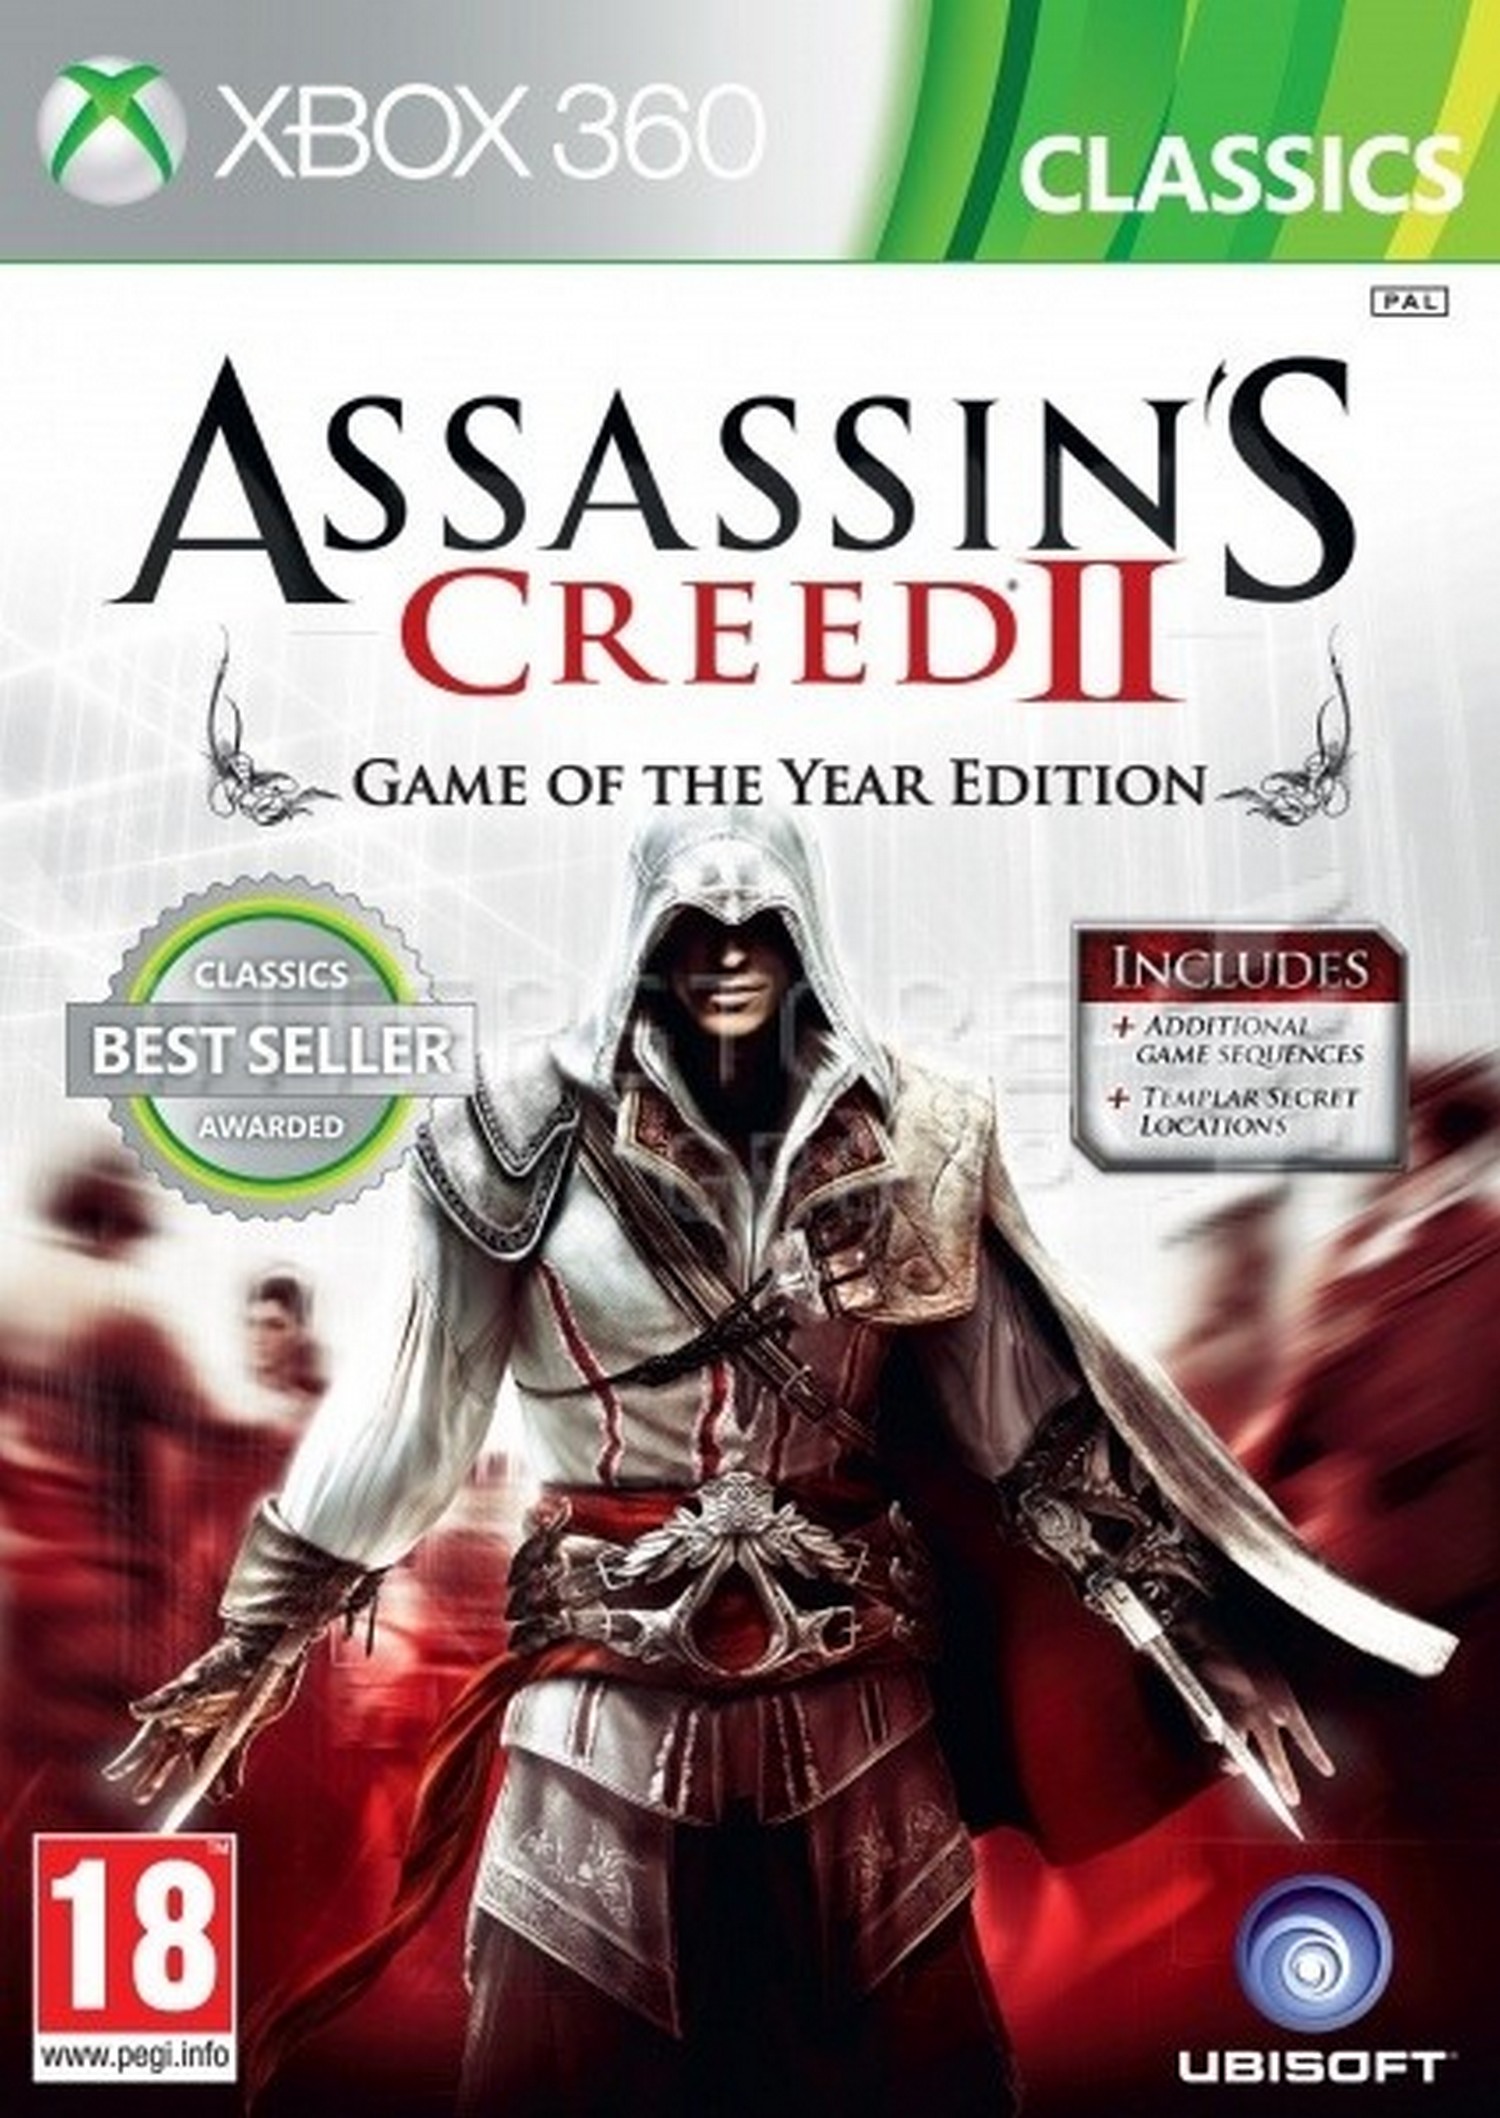 Xbox 360 Assassin's Creed II GOTY Edition - Xbox One Compatible